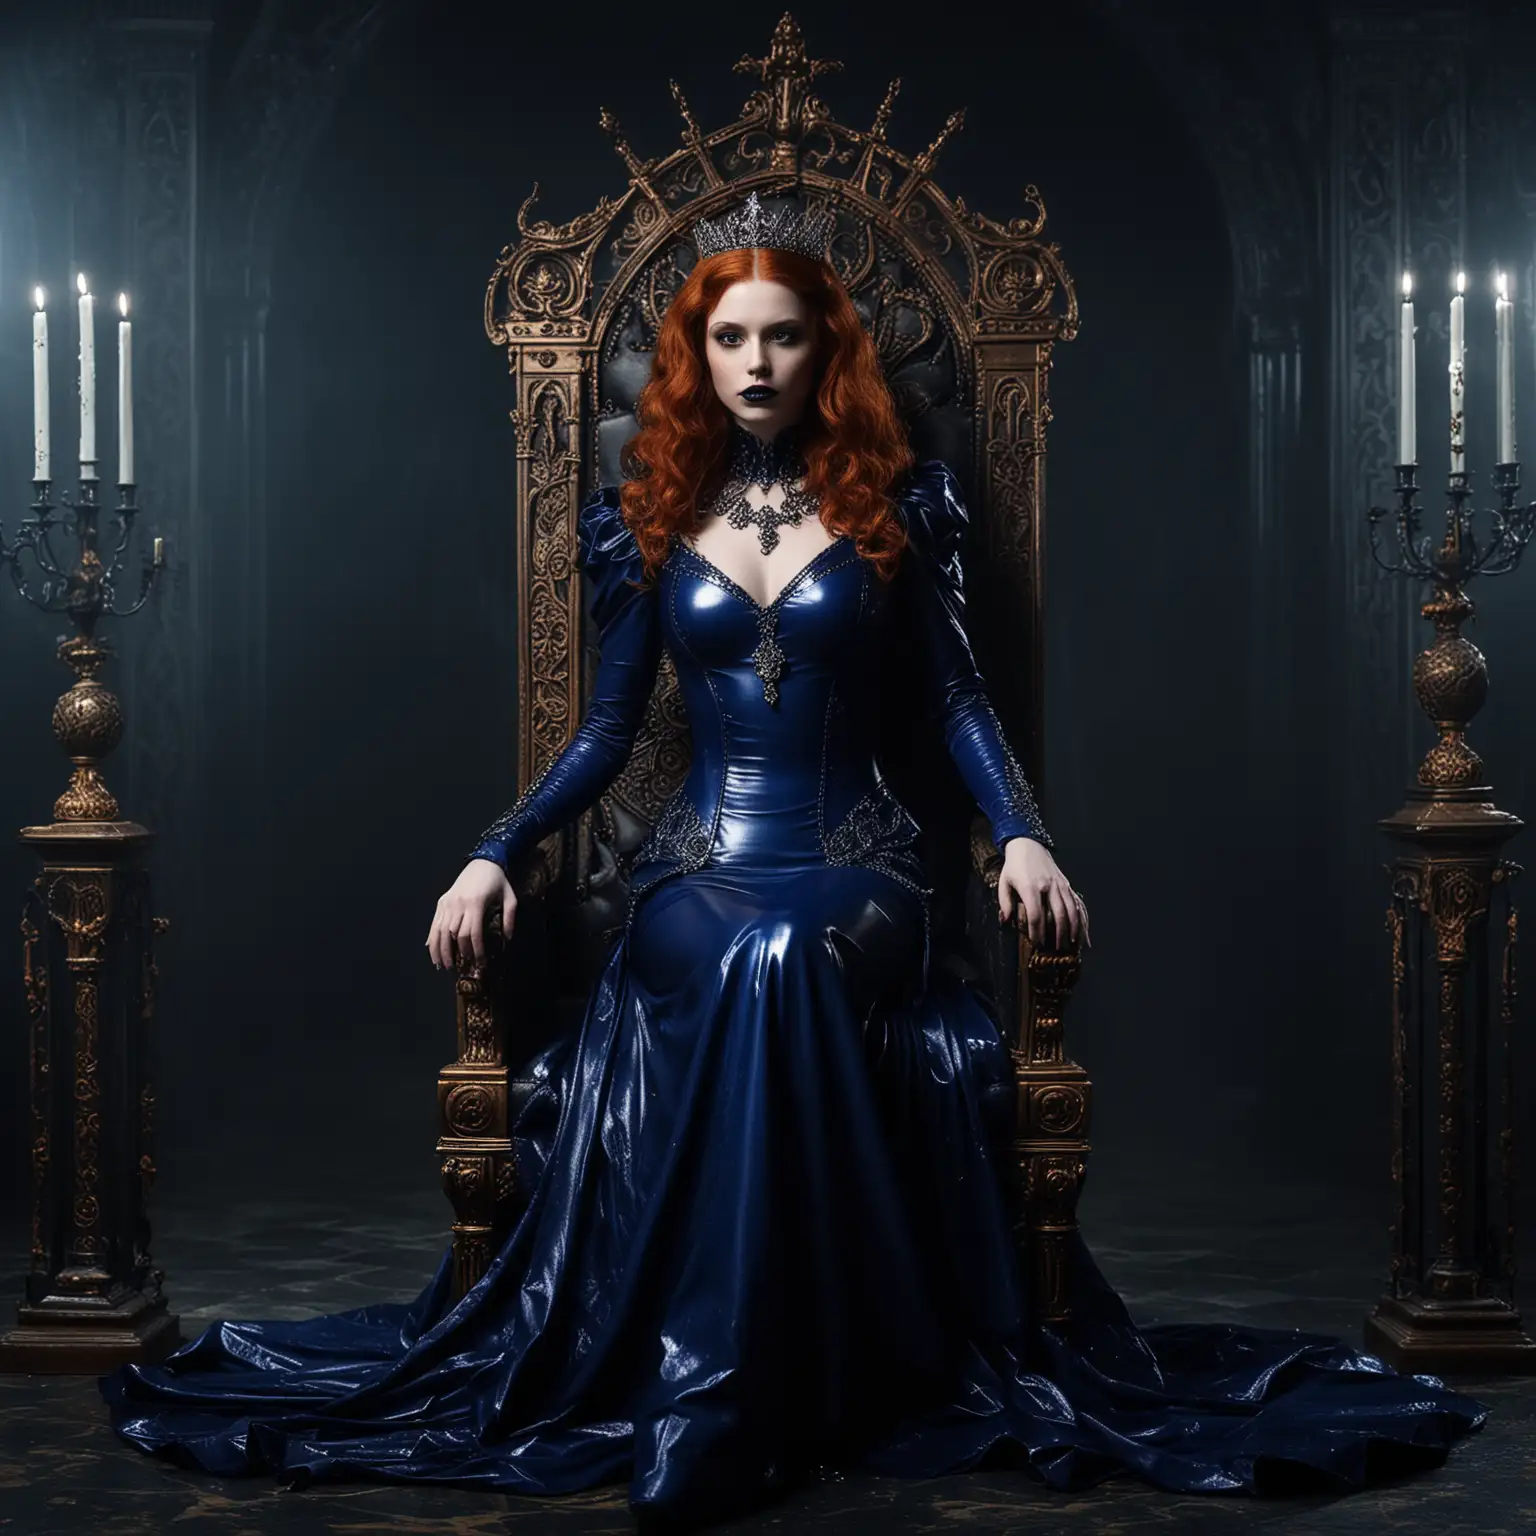 Dark Queens Sinister Sovereignty Royalty in Royal Blue Latex Dress